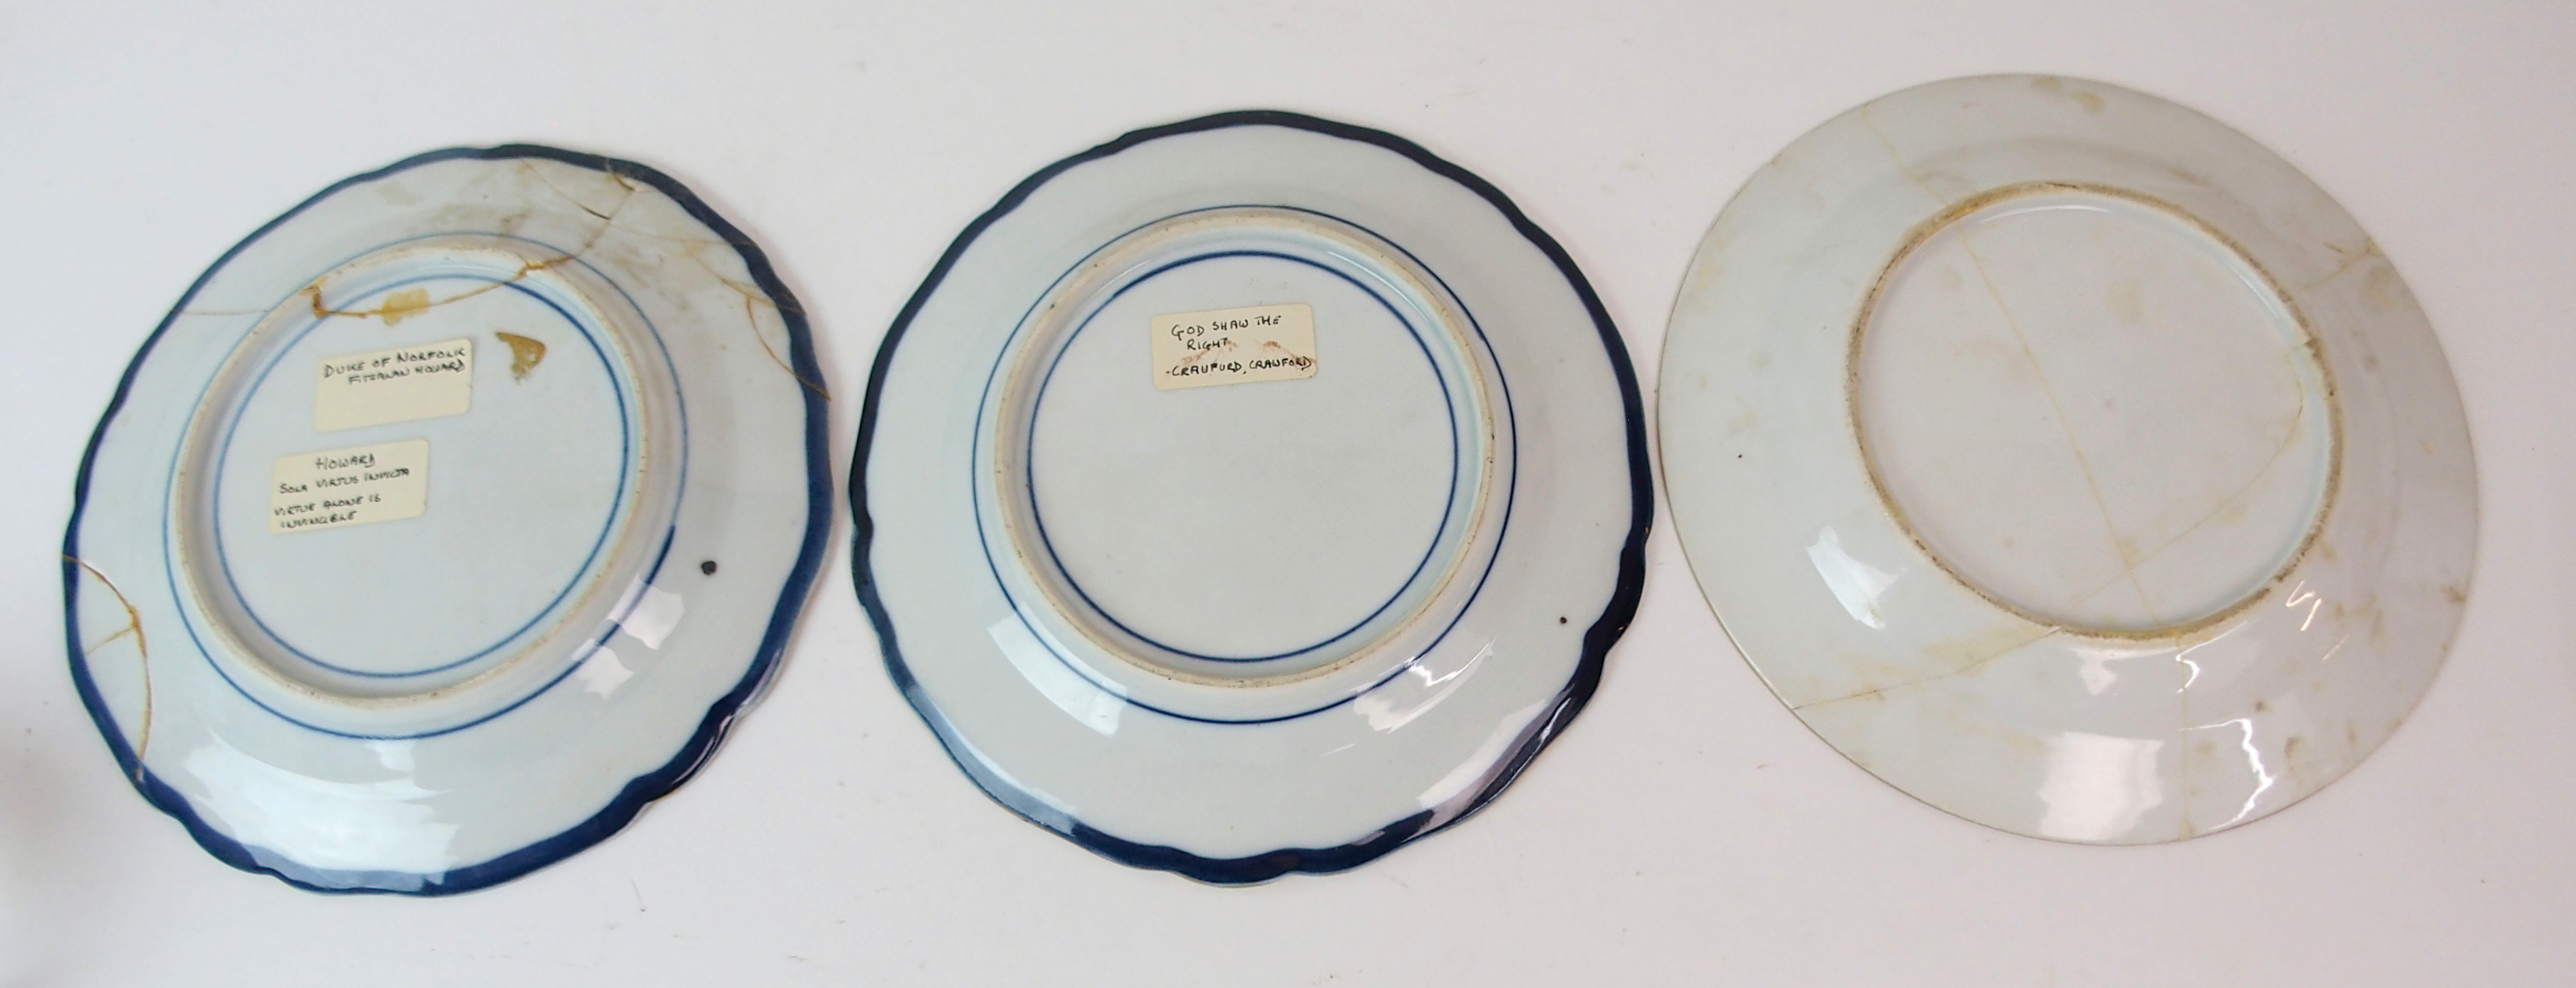 THREE CHINESE EXPORT ARMORIAL PLATES each showing a coat of arms for Howard, Crawford and Egerton, a - Image 5 of 10